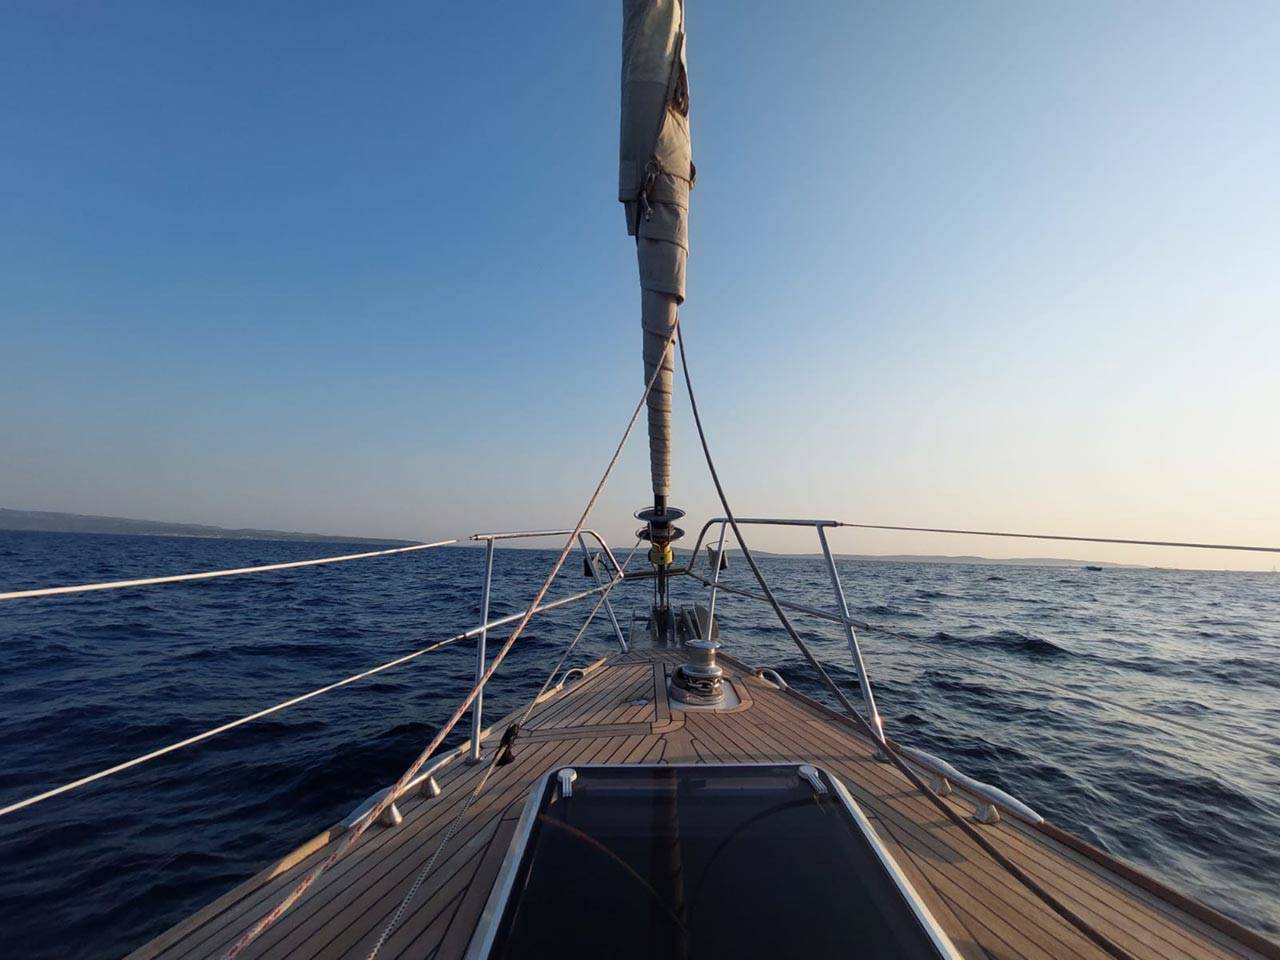 View from the sailing yacht